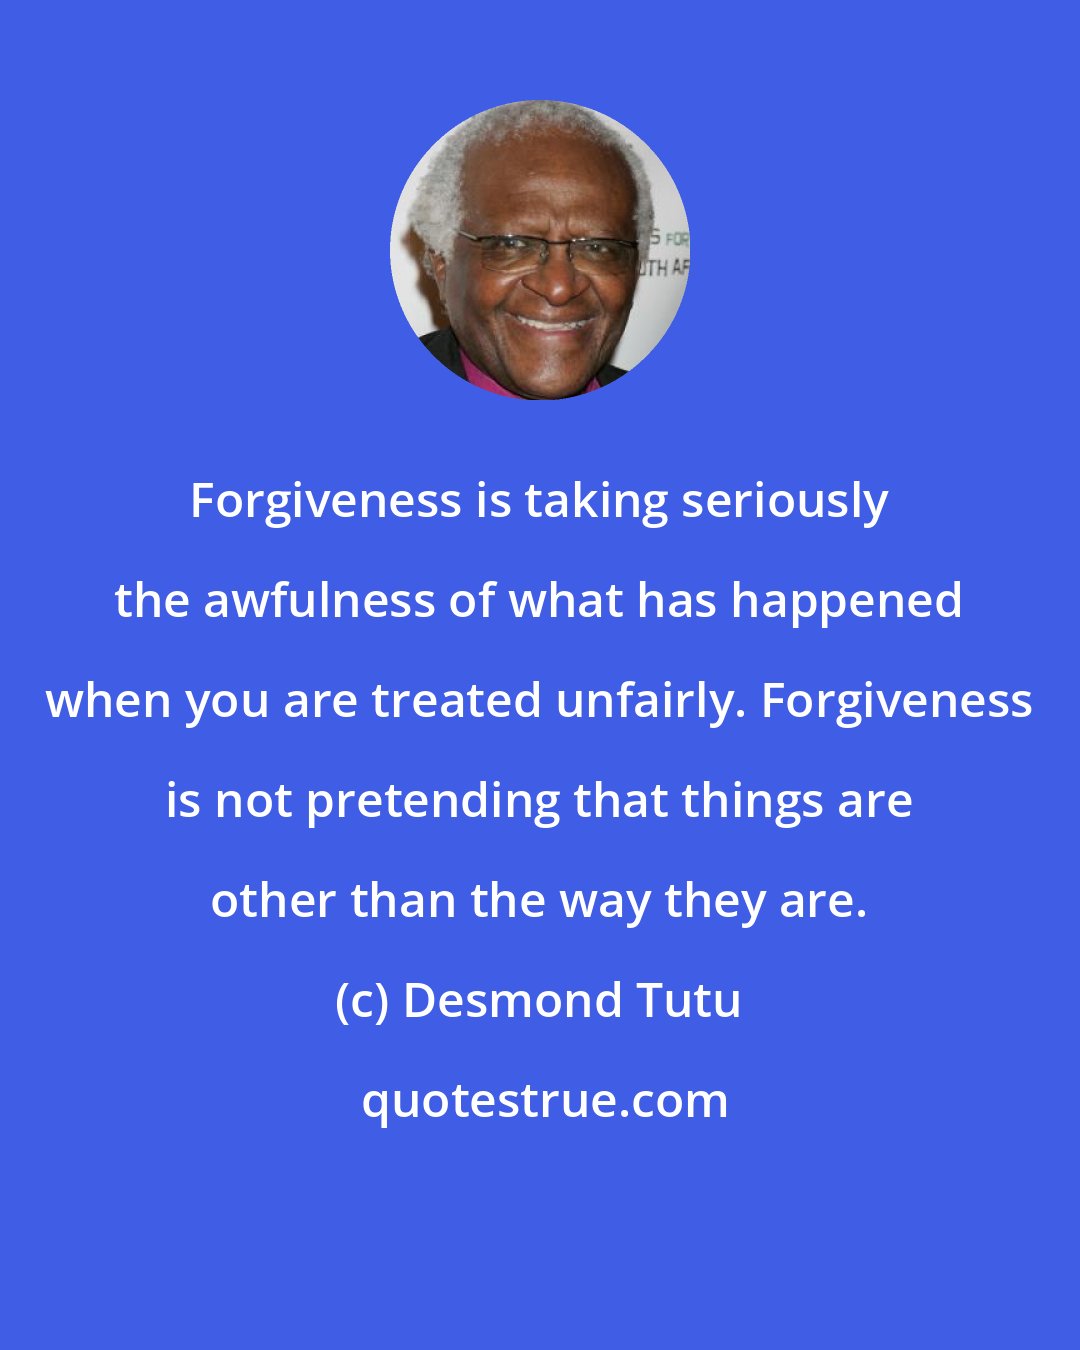 Desmond Tutu: Forgiveness is taking seriously the awfulness of what has happened when you are treated unfairly. Forgiveness is not pretending that things are other than the way they are.